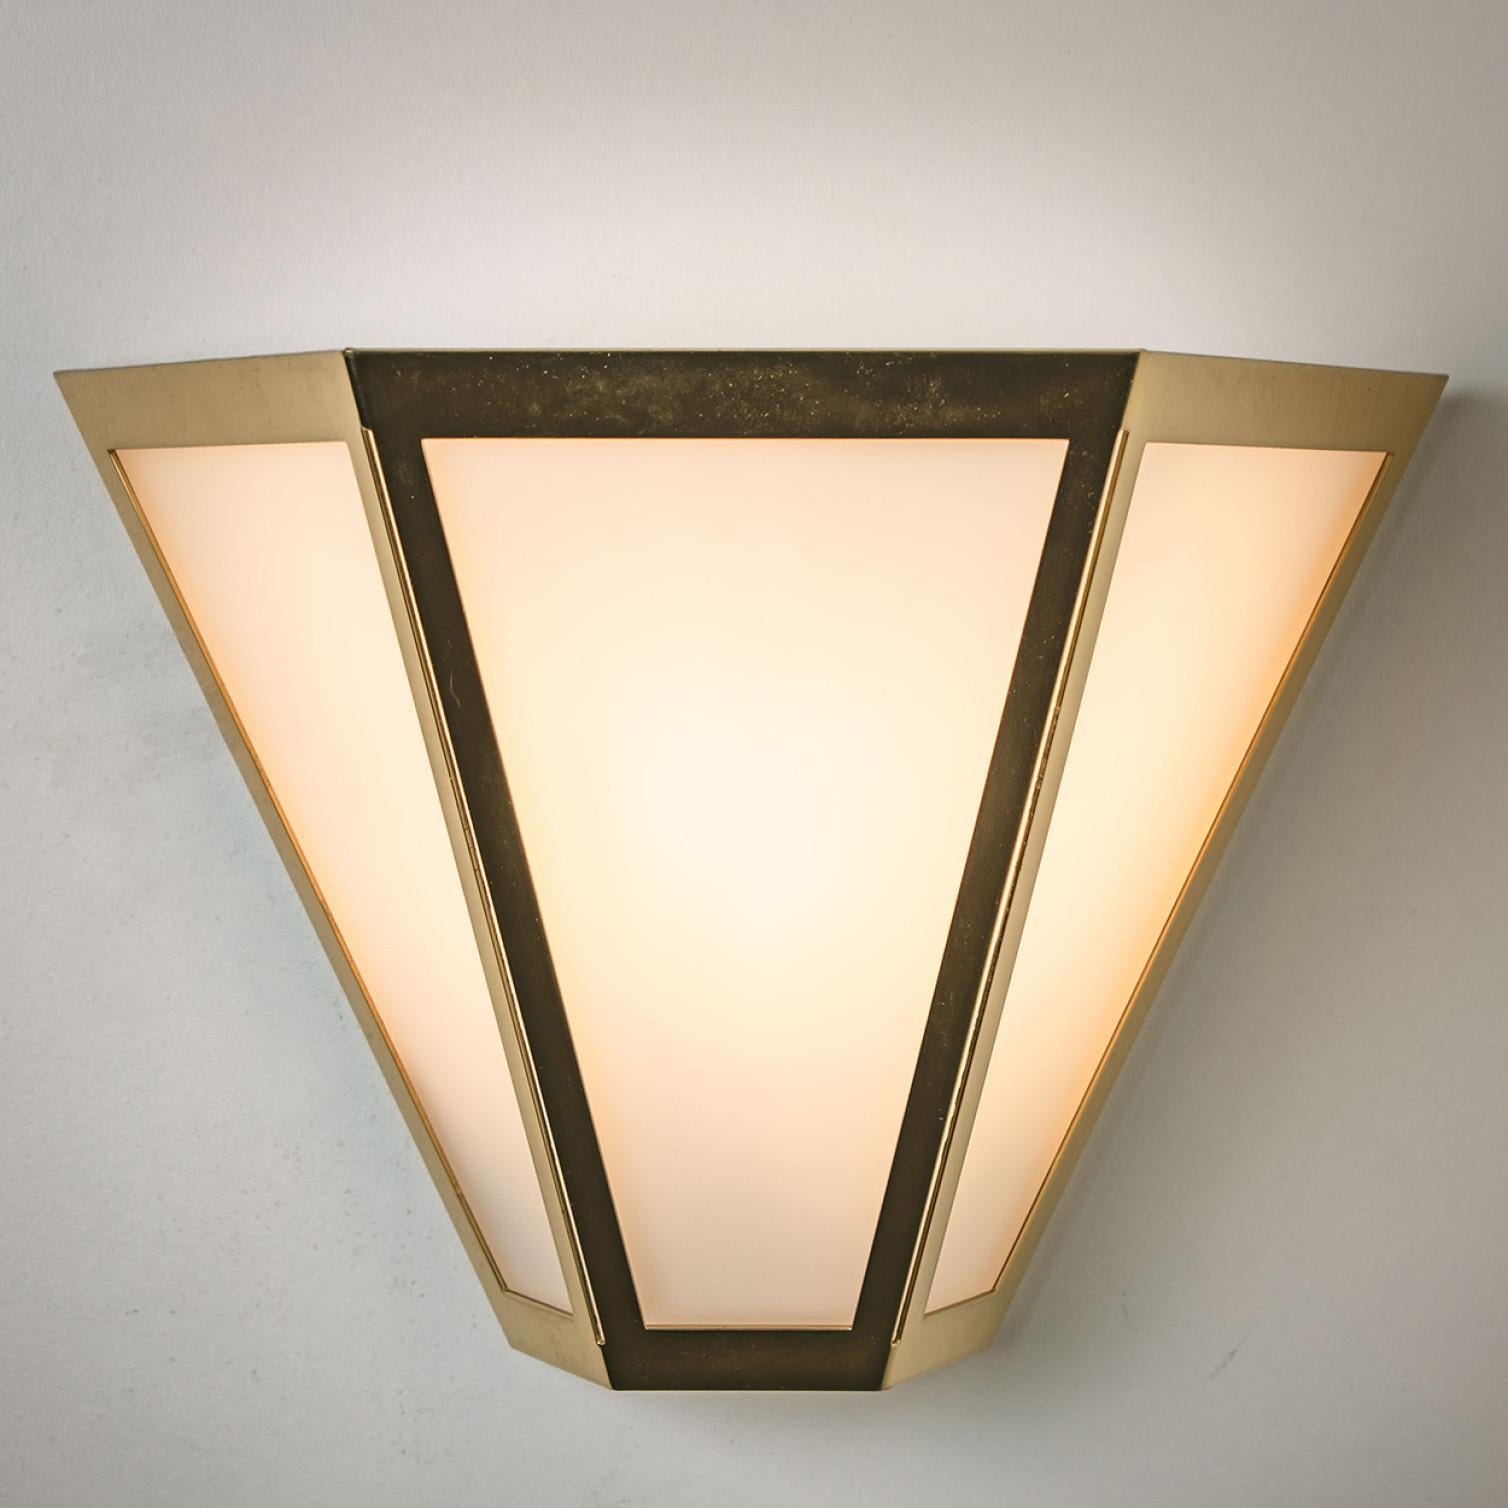 Late 20th Century White Glass and Brass Pyramid Wall Lights by Limburg, 1970s For Sale